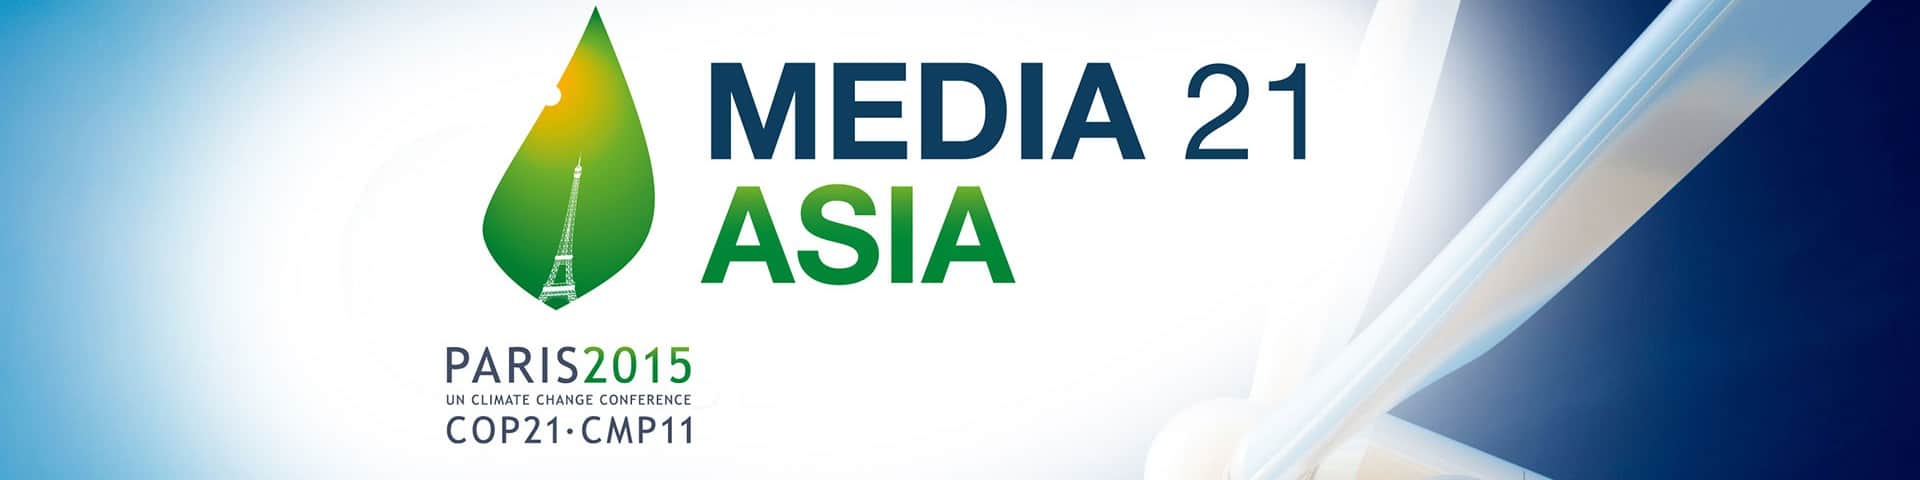 Media 21 Asia: Journalism and climate change